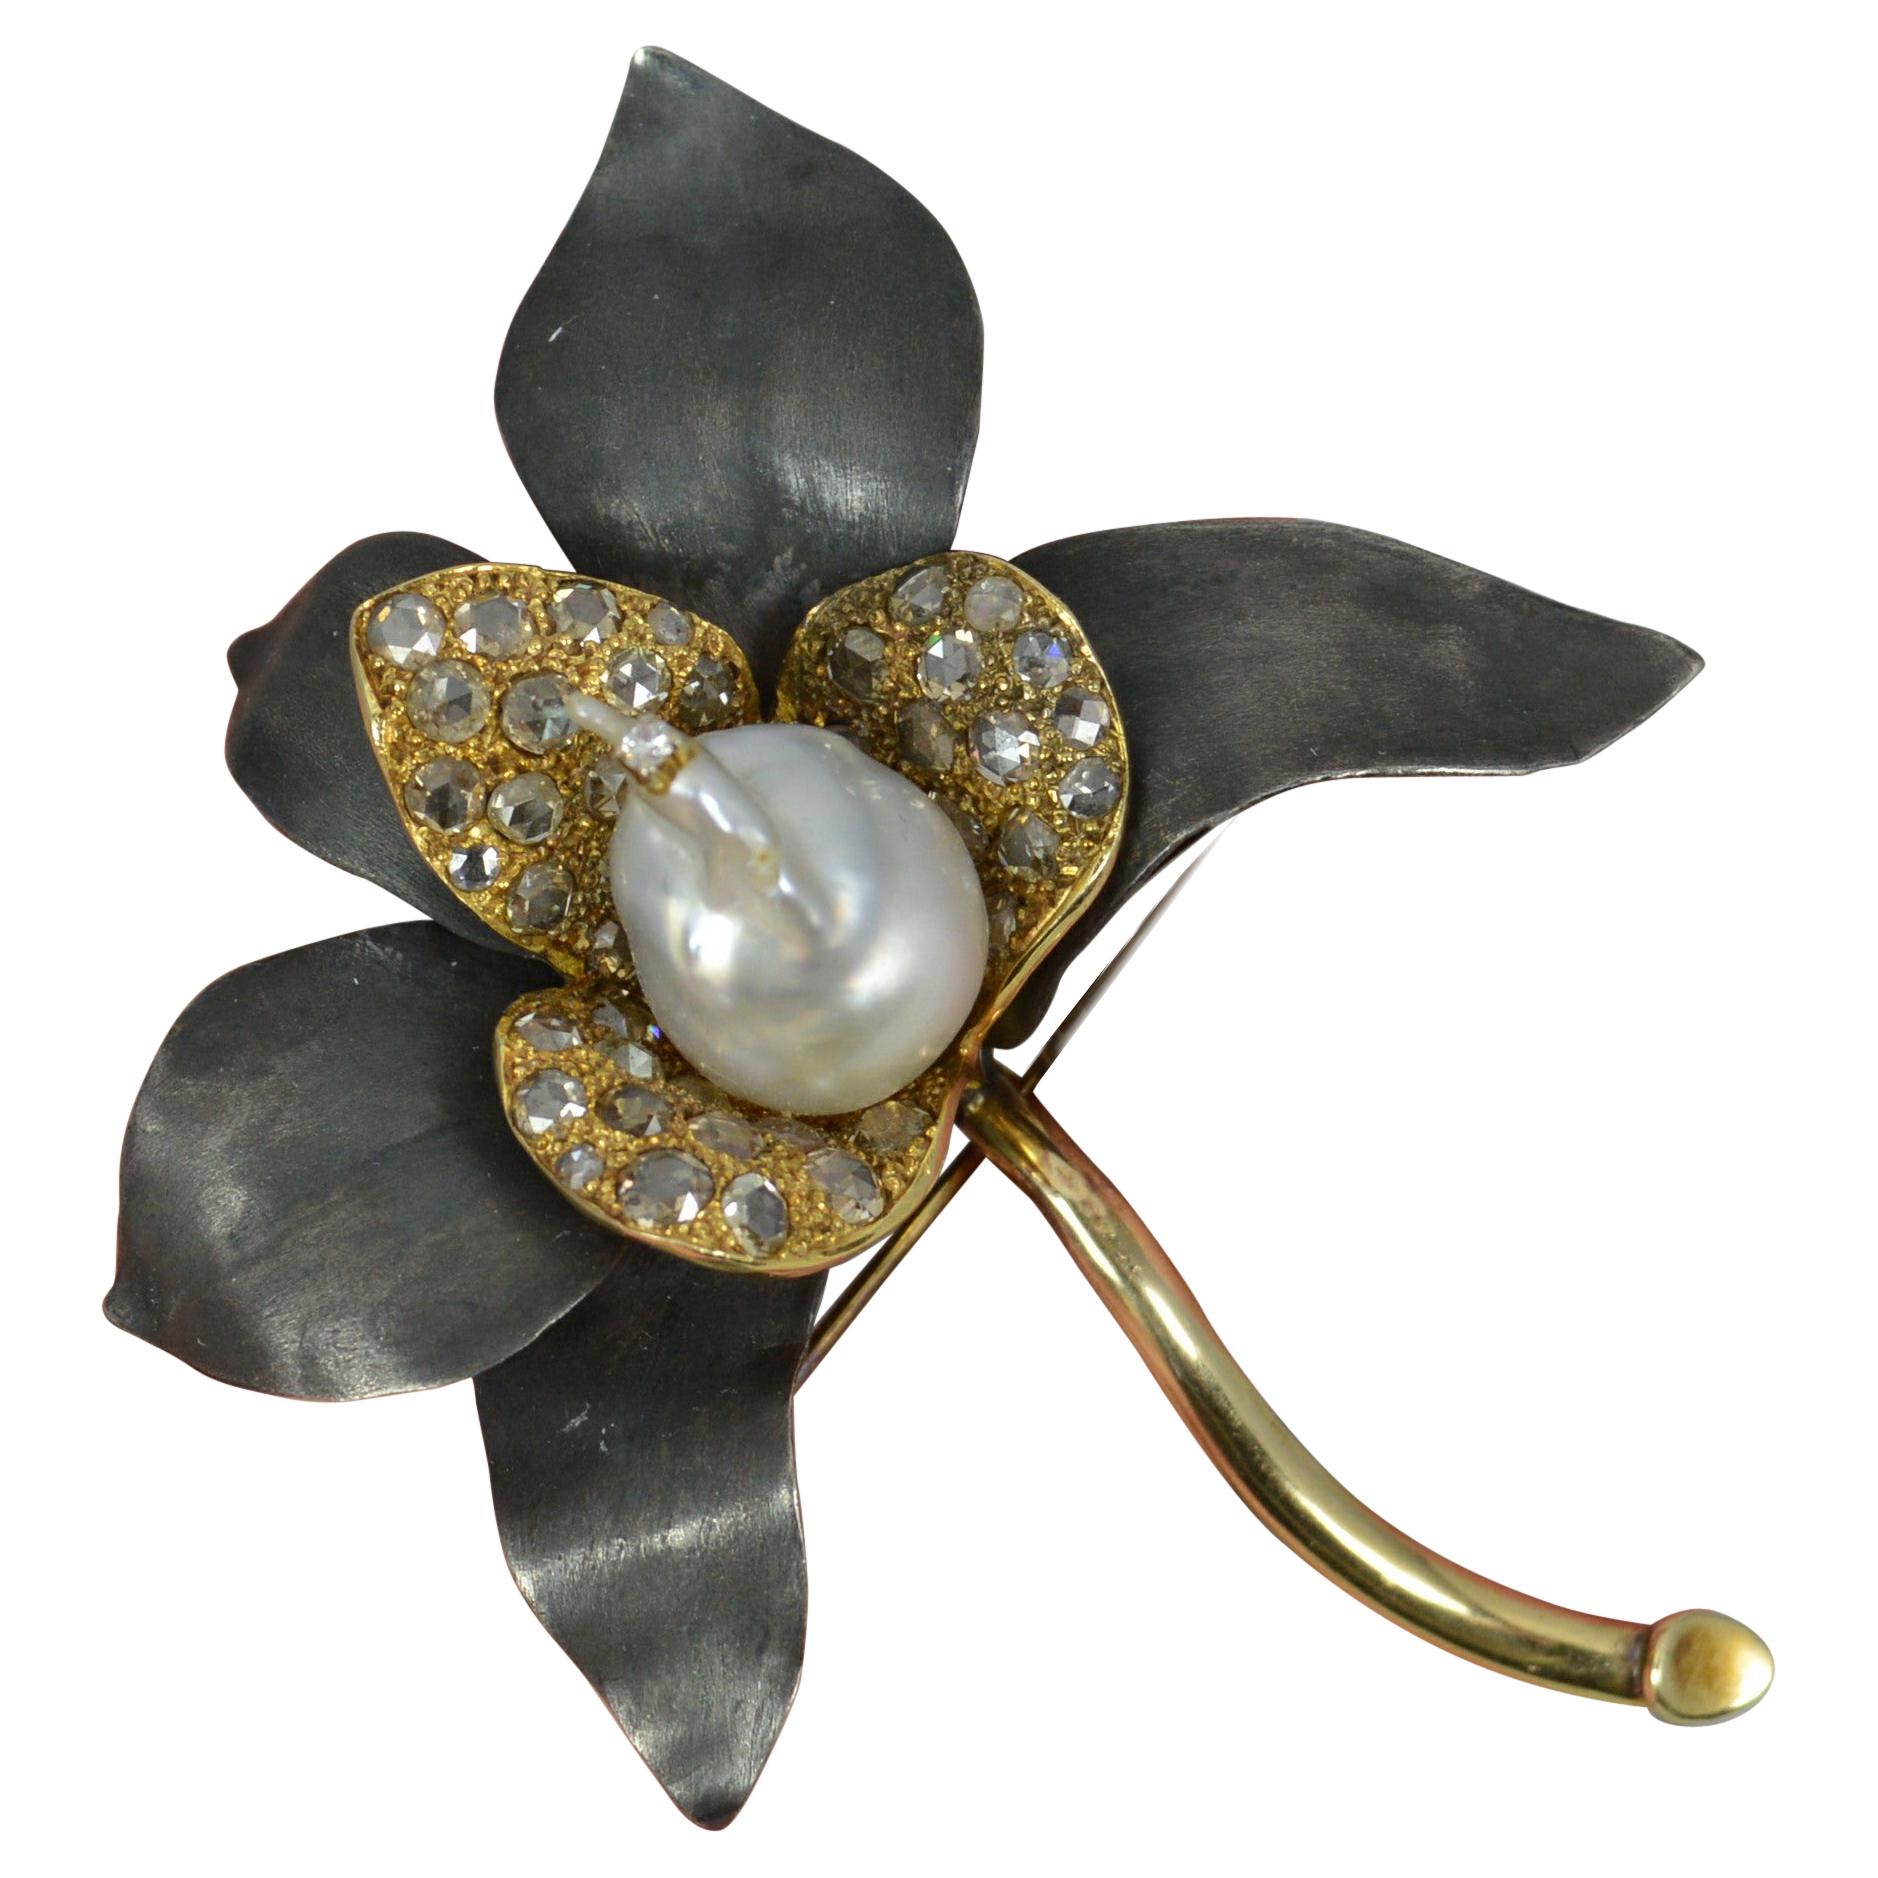 Impressive 14ct Gold Pearl and Rose Cut Diamond Flower Brooch